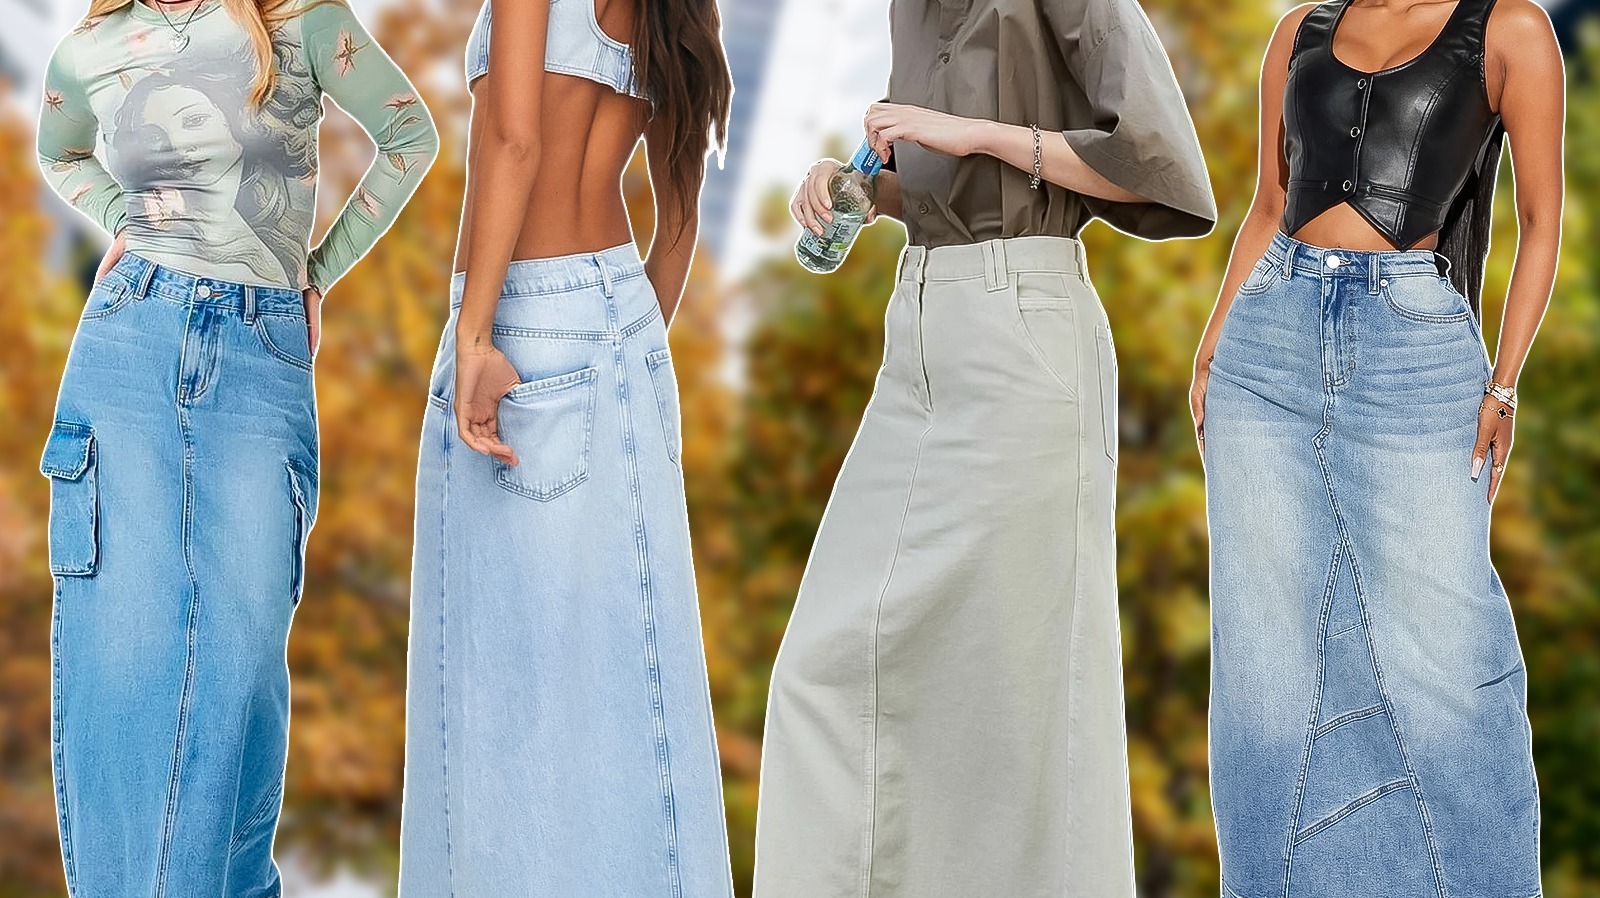 The Denim Maxi Skirt Isn't Going Anywhere - How To Style It For